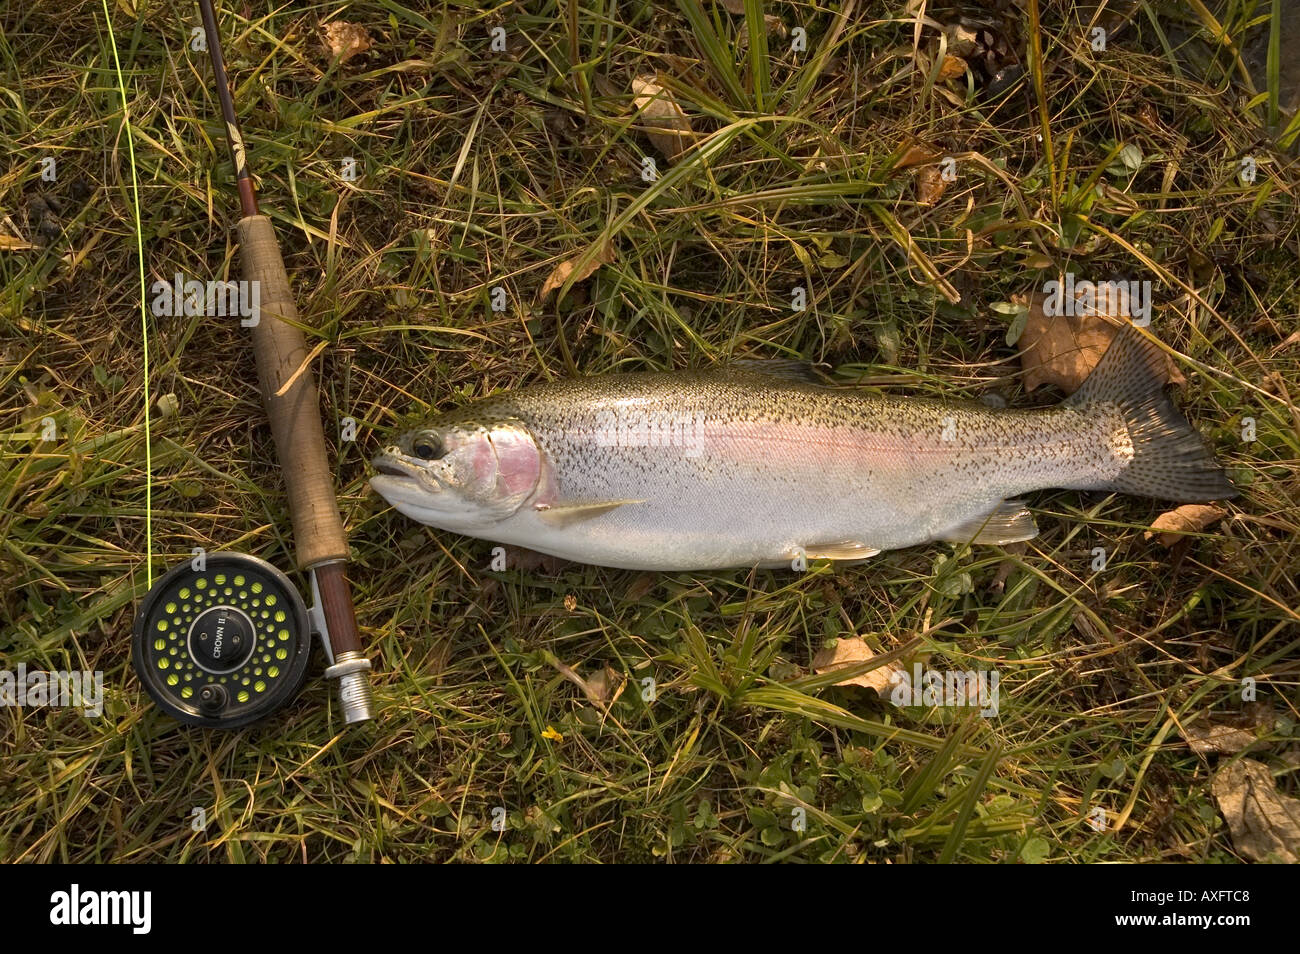 https://c8.alamy.com/comp/AXFTC8/a-rainbow-trout-lies-in-the-grass-next-to-a-fly-fishing-pole-AXFTC8.jpg